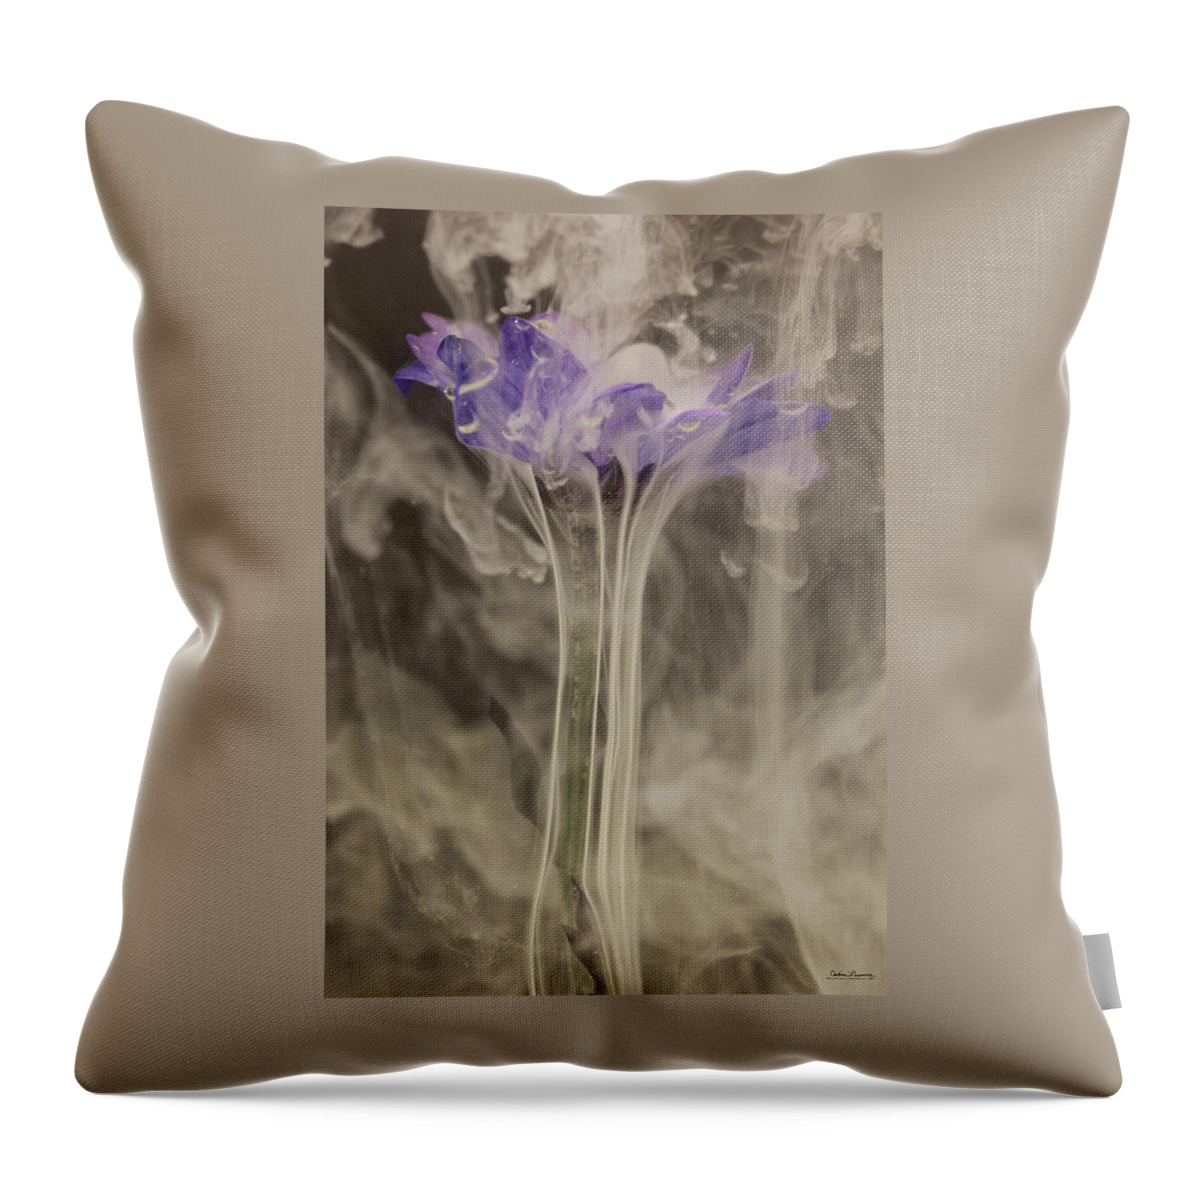 Saskatchewan Throw Pillow featuring the photograph Unique Flowers 5 by Andrea Lawrence